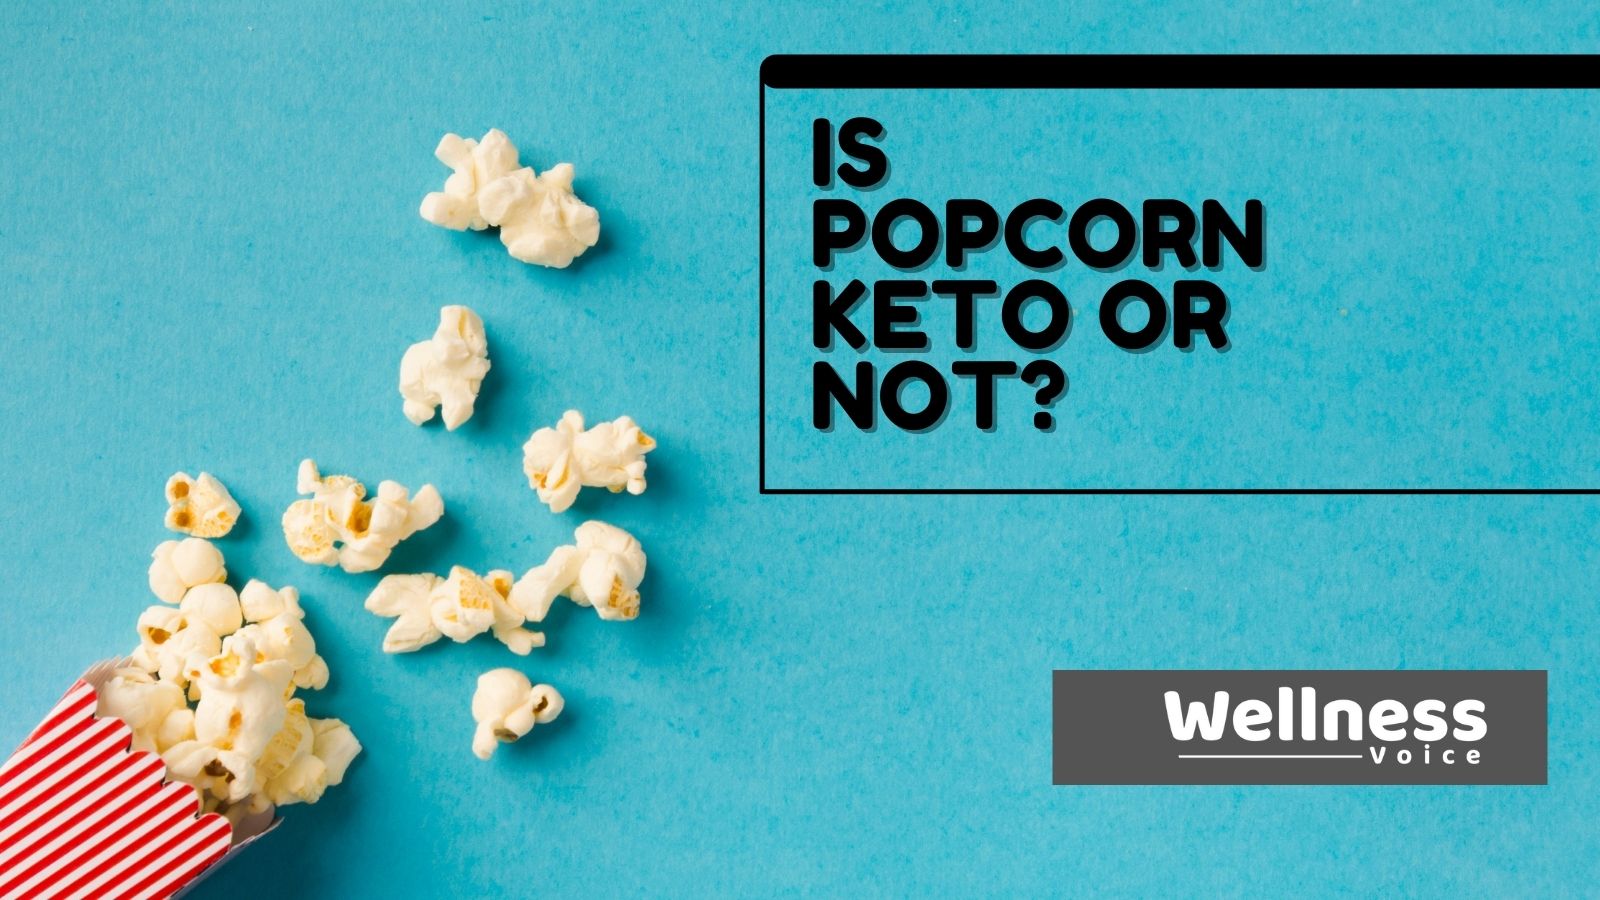 Is Popcorn Keto or Not?